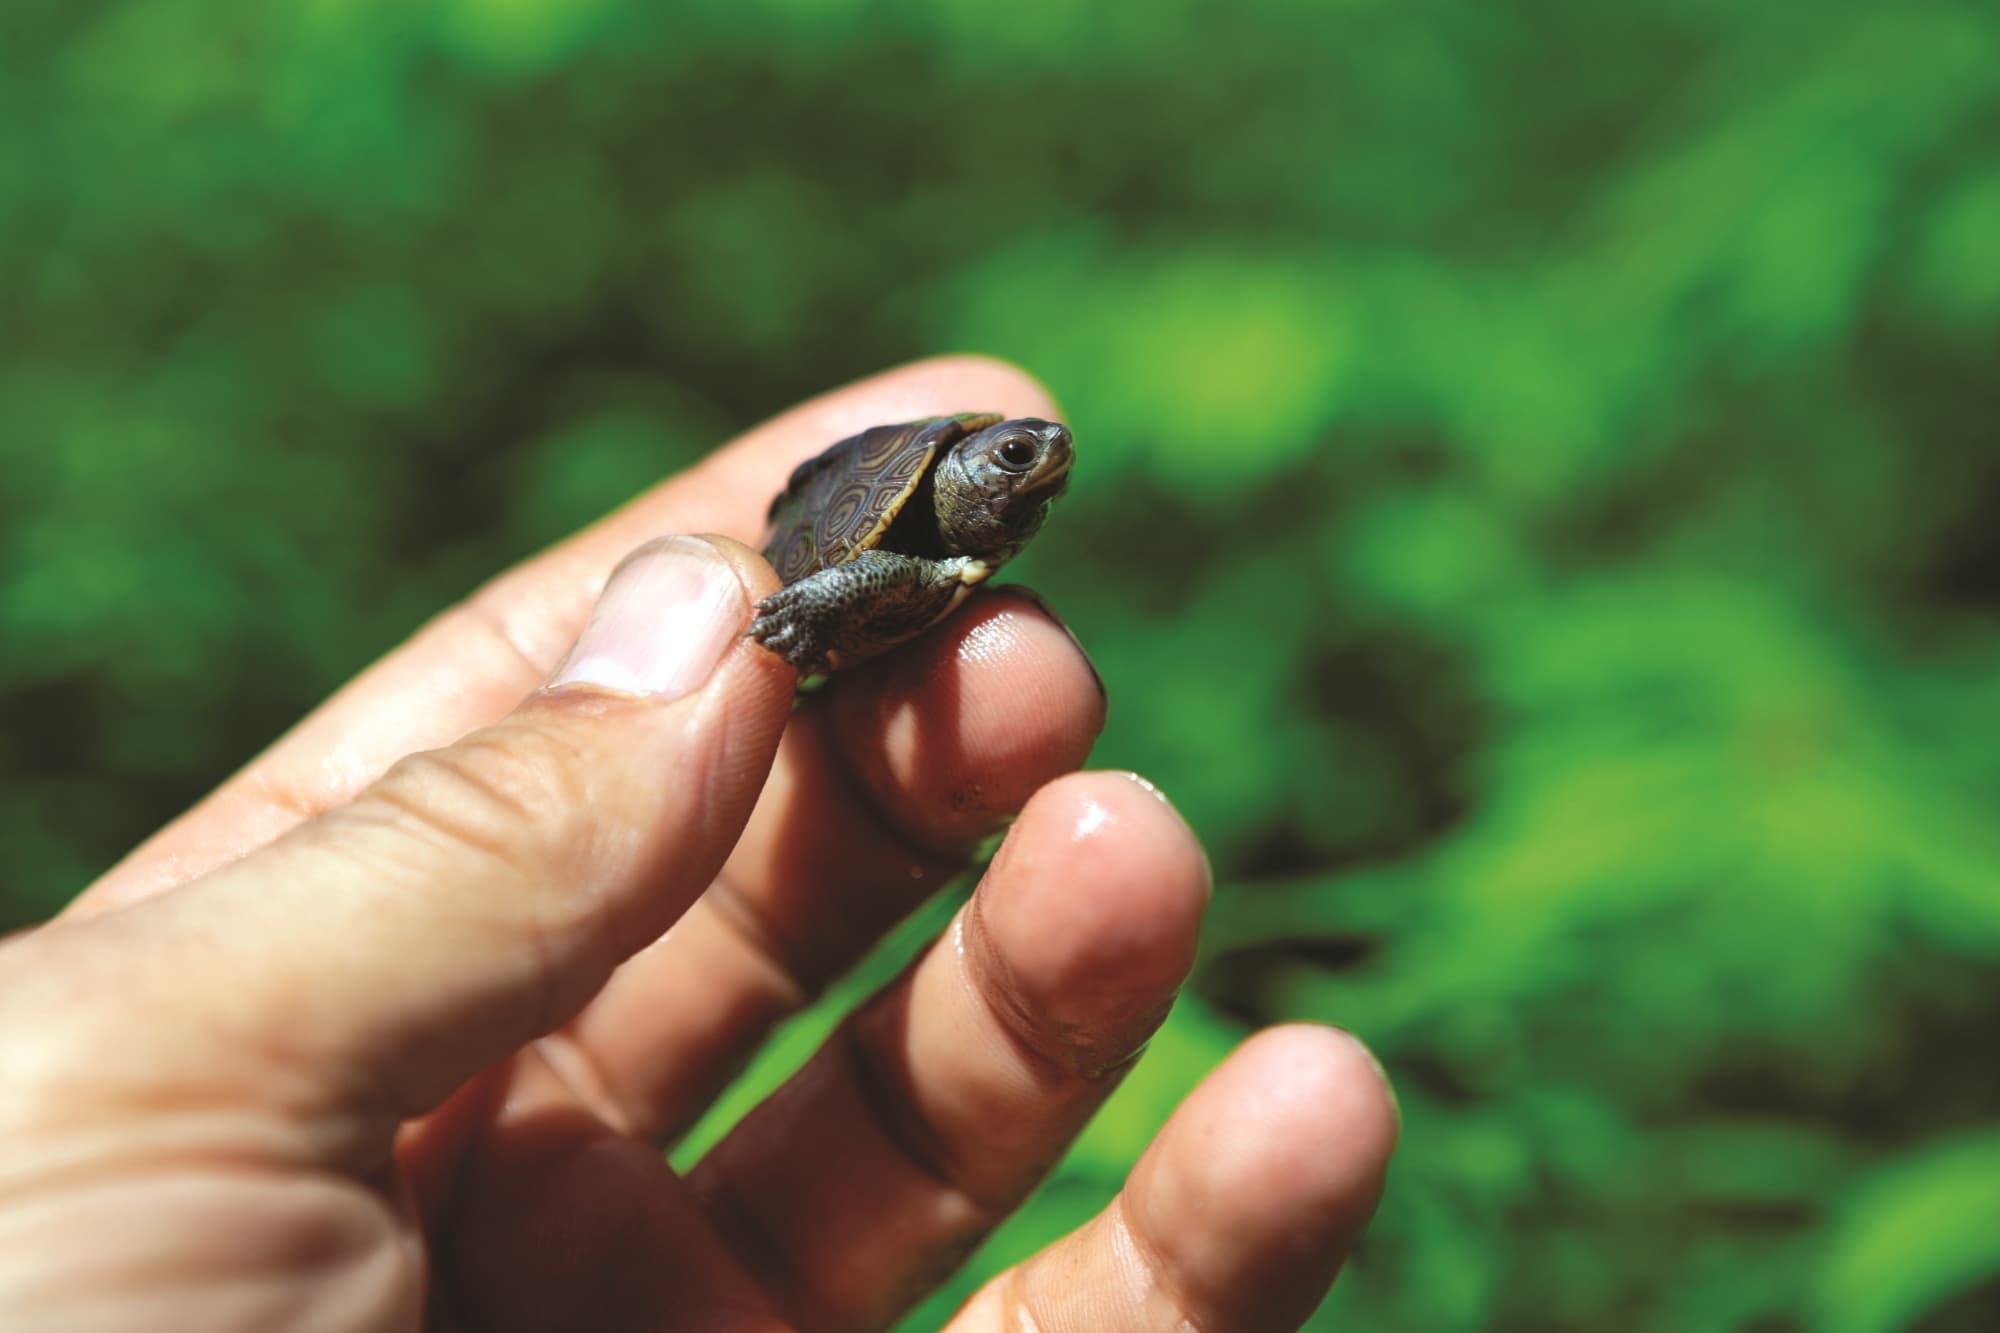 Close up of hand holding baby terrapin turtle.